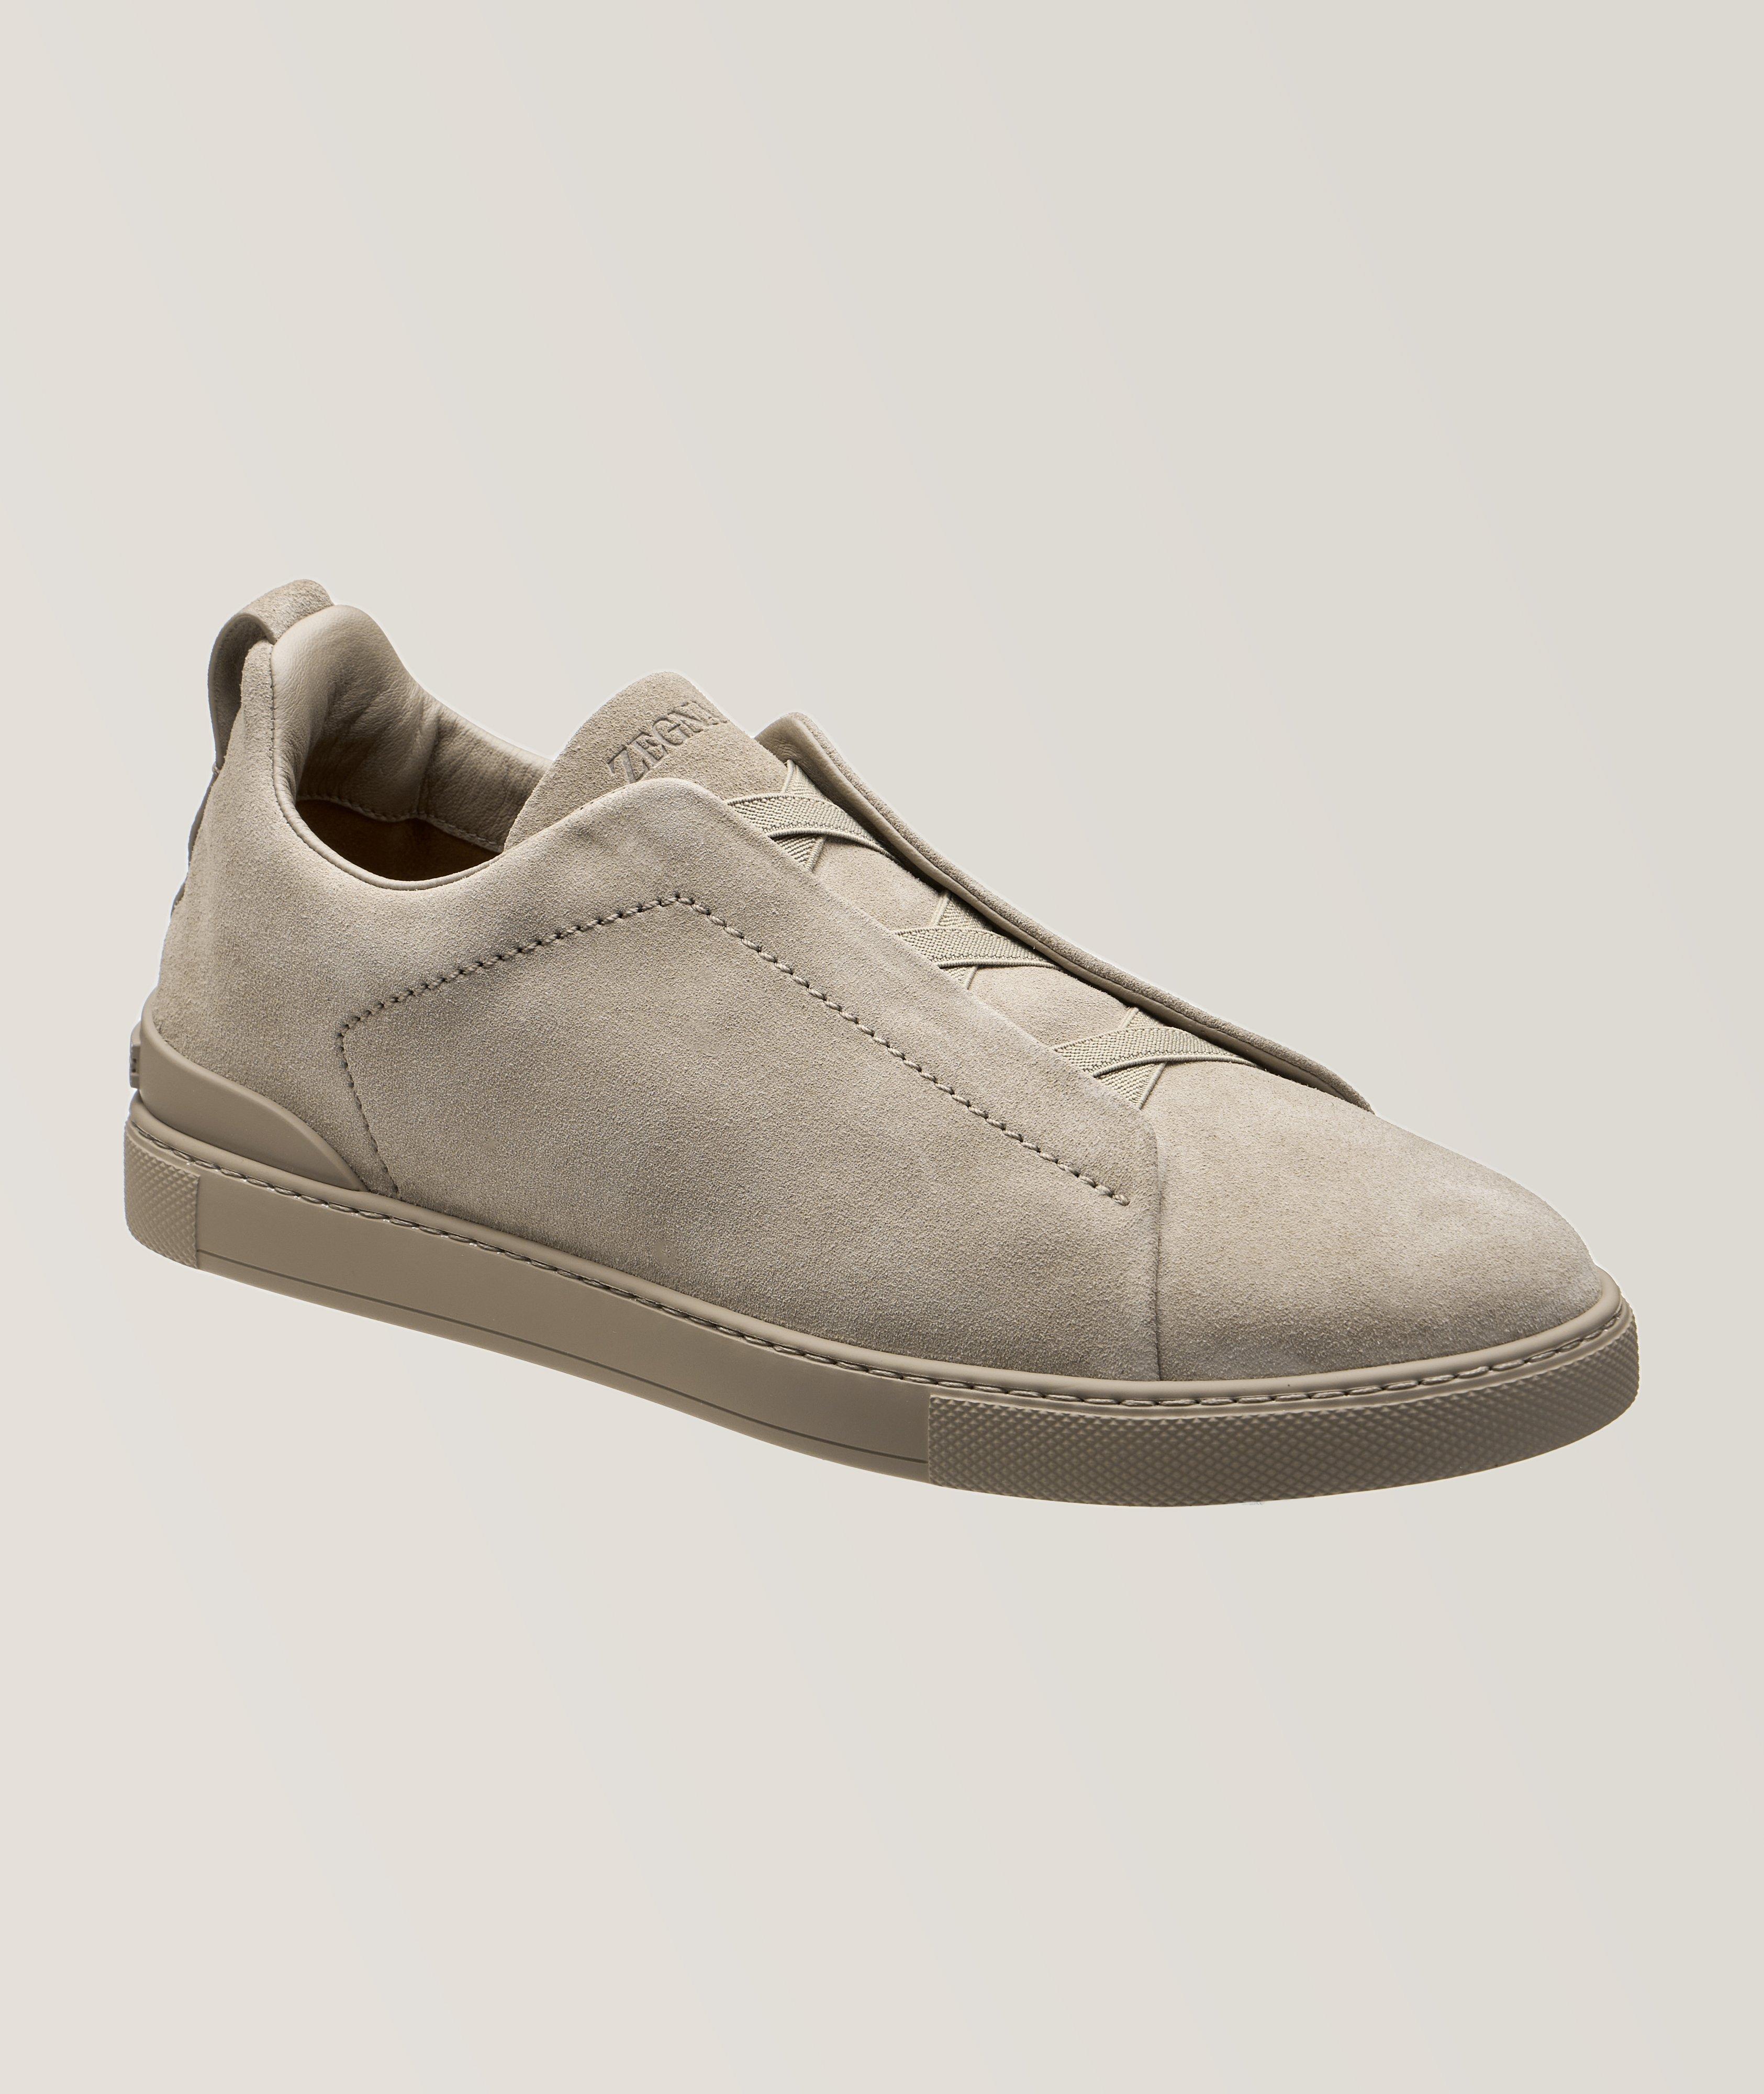 Triple Stitch Tonal Suede Slip-On Sneakers image 0